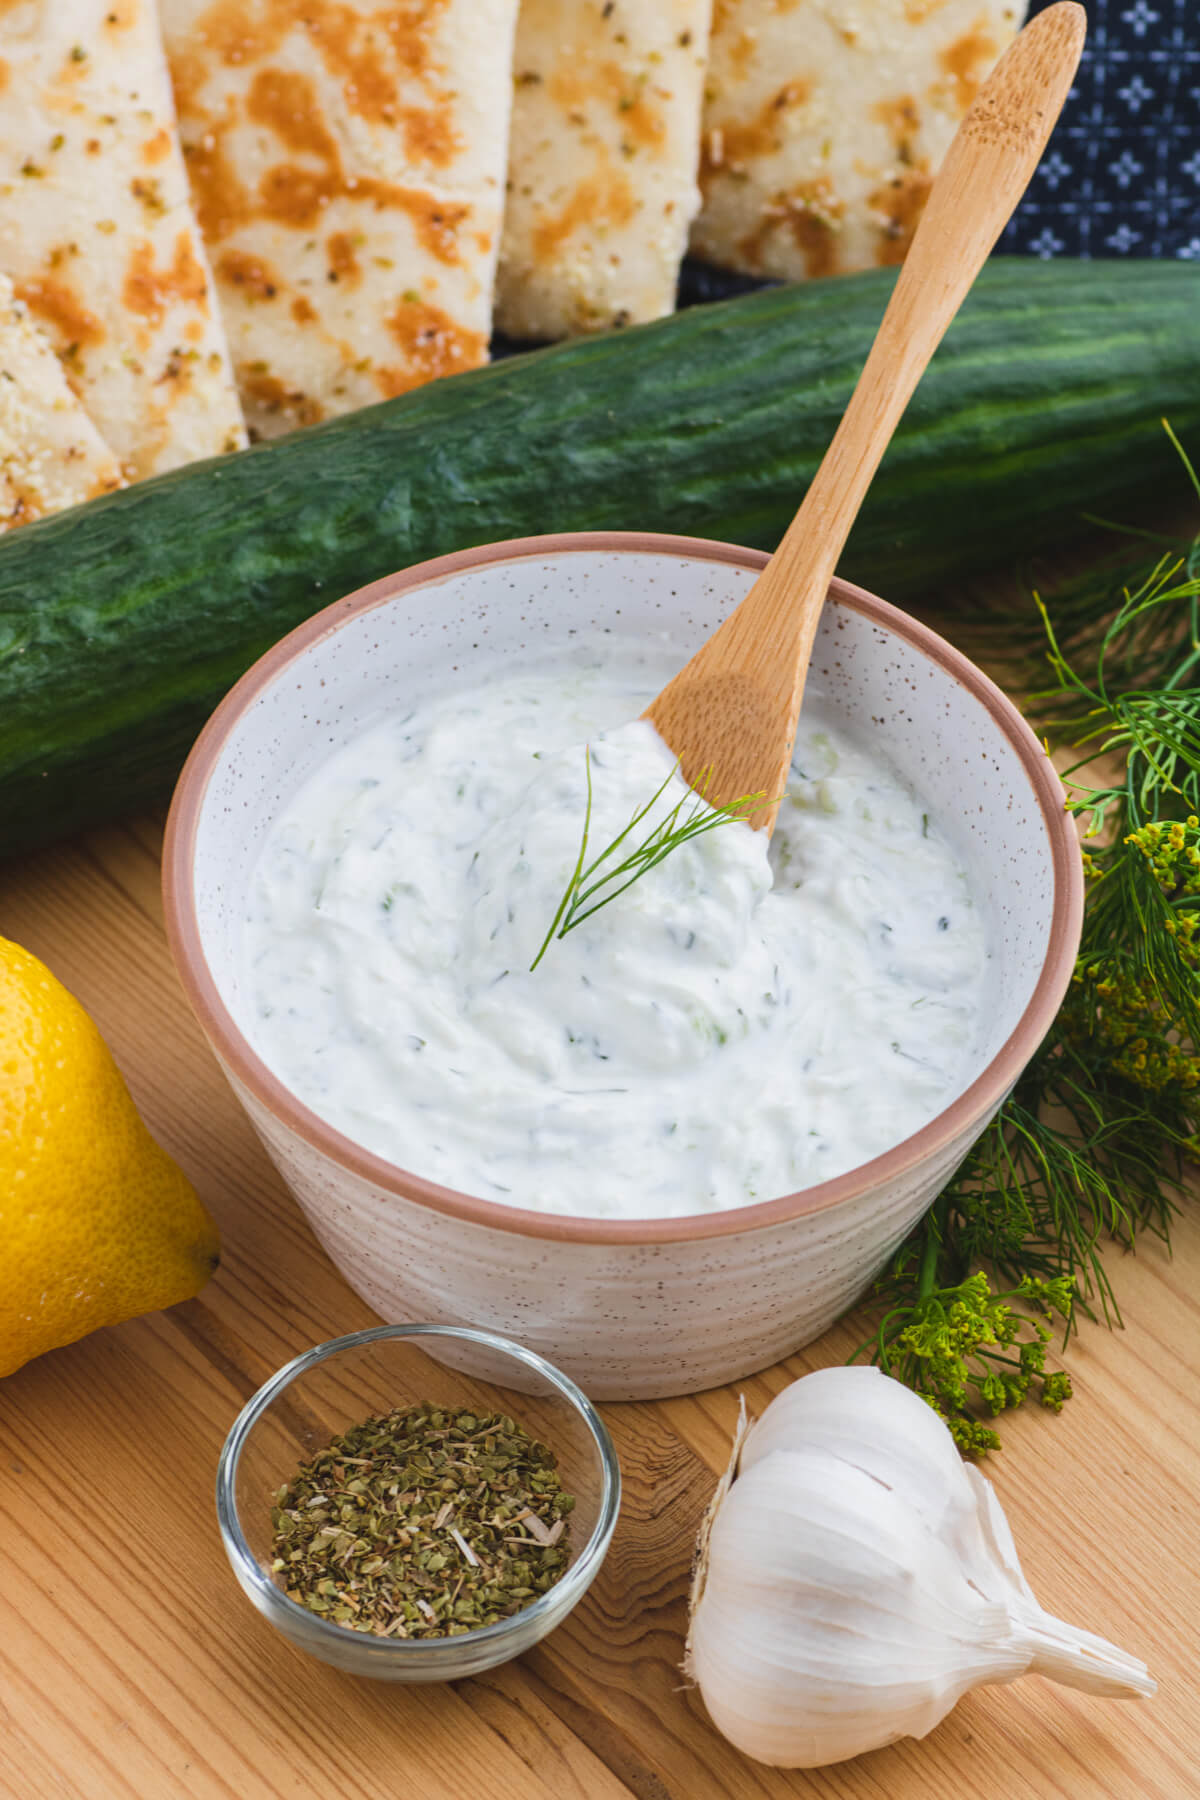 A wooden spoon serves up creamy white Tzatziki sauce flecked with cucumber and dill from a small bowl surrounded by grilled pita bread and other ingredients.